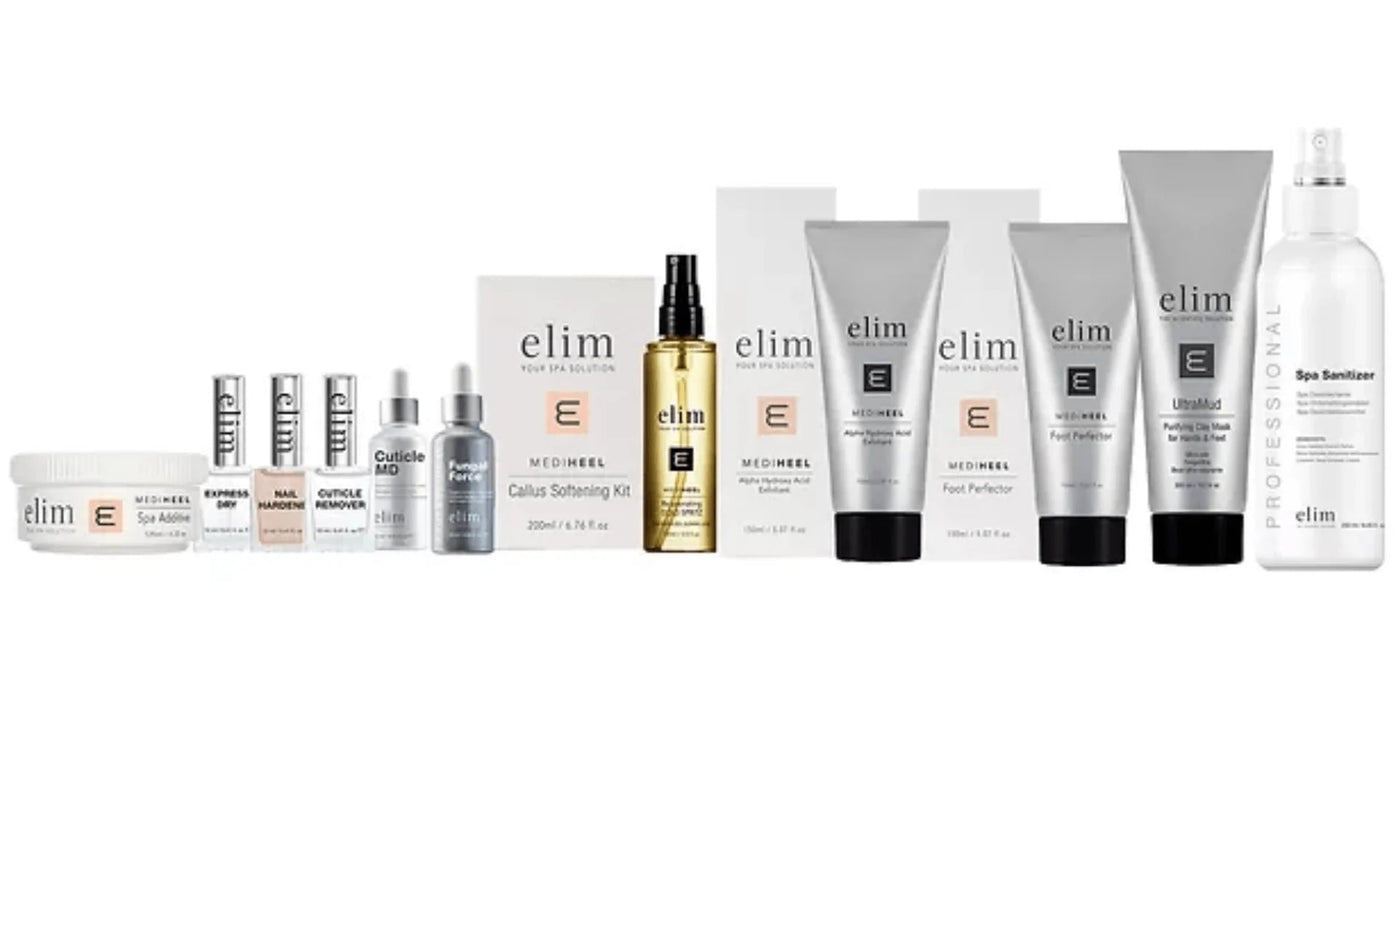 Elim Spa Products | The Beautiful Online Store